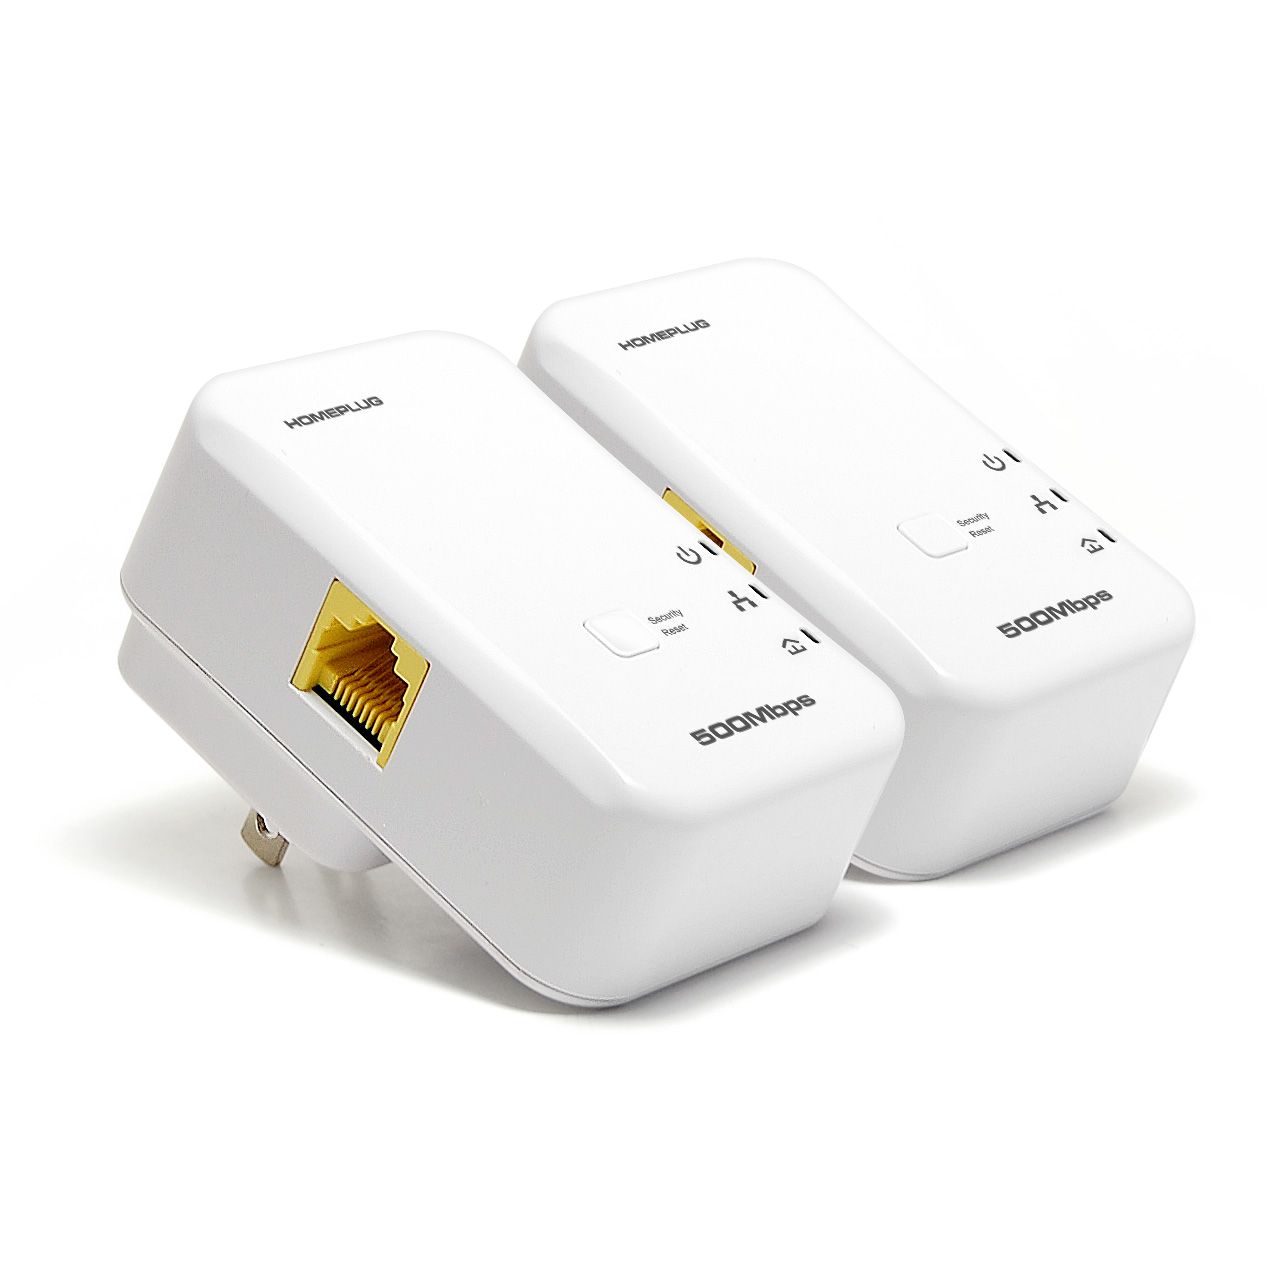 Powerline-Adapter-200Mbps-Etherent-Adapter-Plug-and-Play-Network-Bridge-2-PCS-1739520